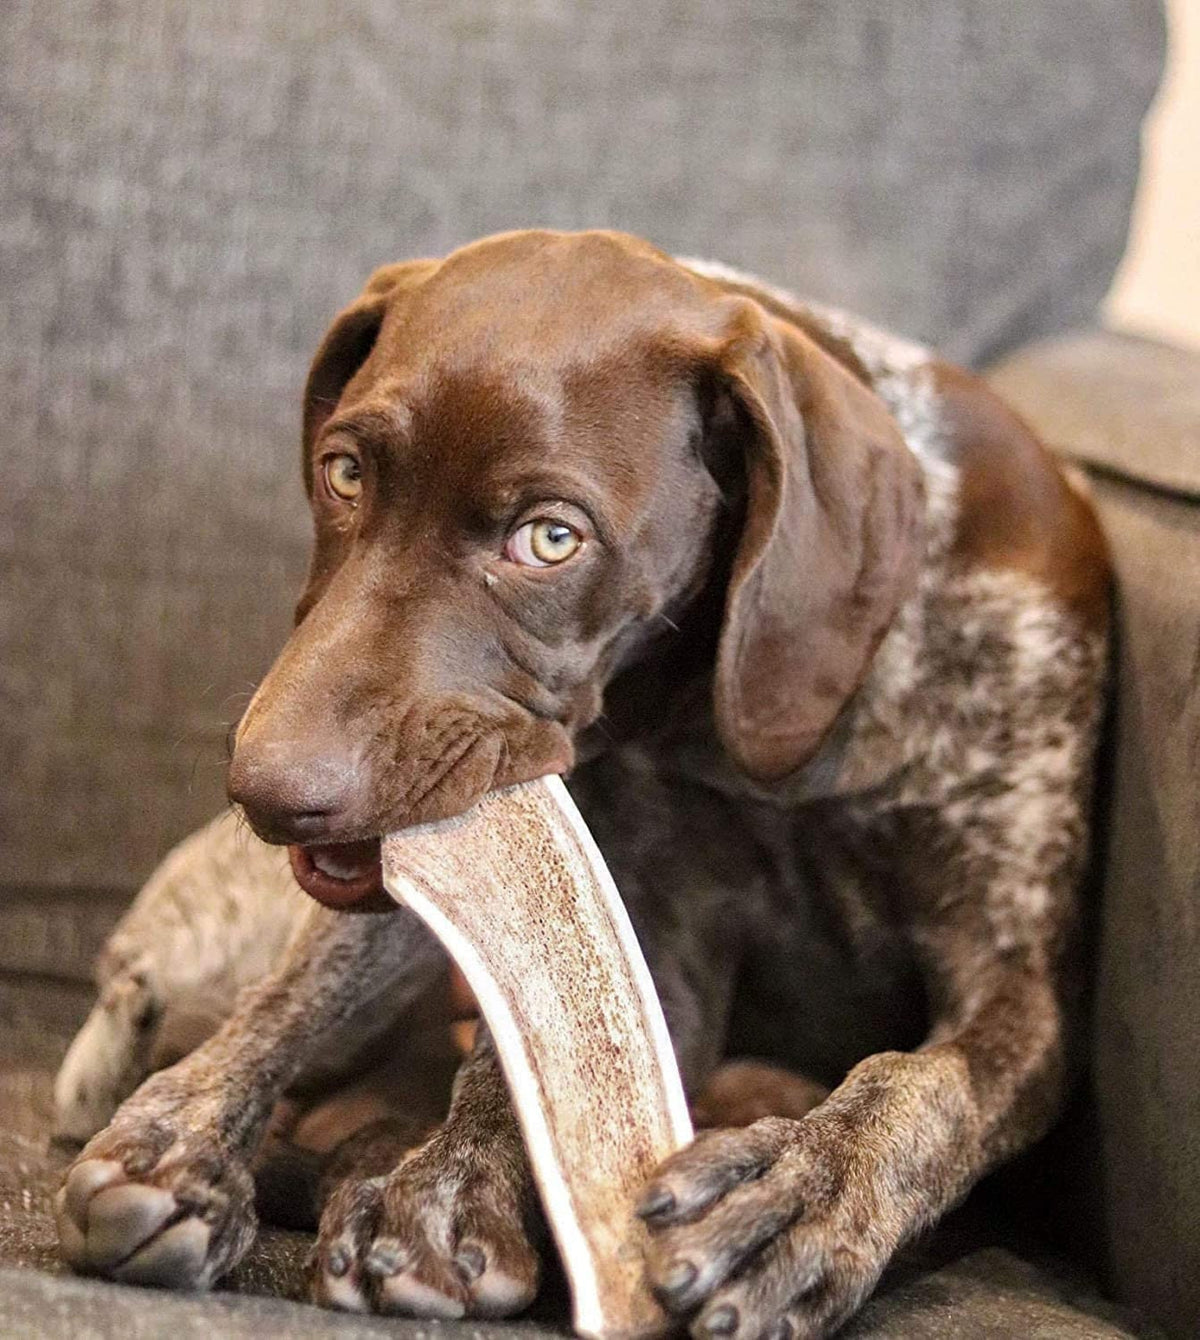 Economy Split Elk Antler Dog Chew 3 Count - Grade B/C Natural Organic and Long Lasting Treats Made from Naturally Shed Antlers in The USA